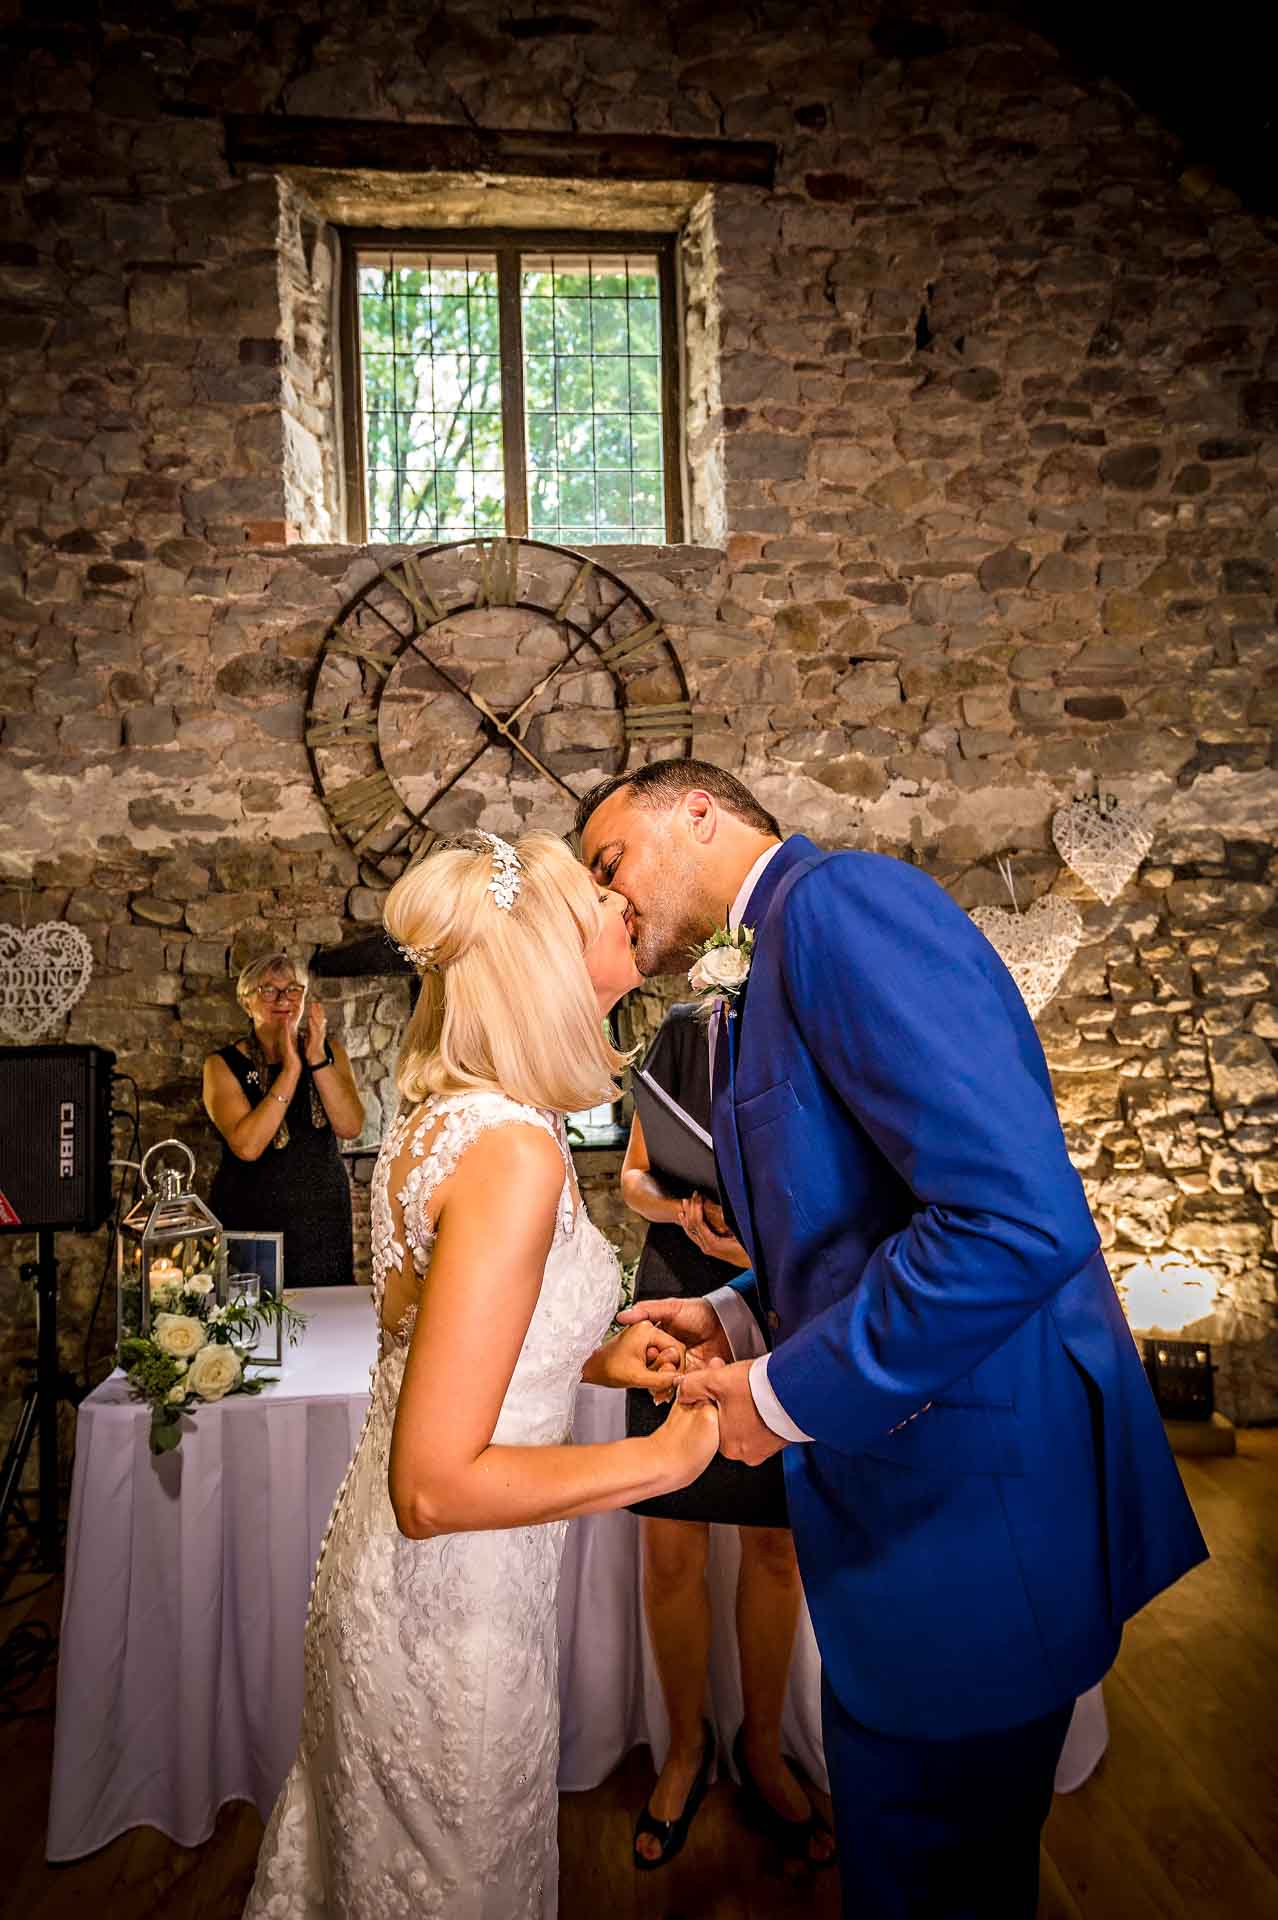 Newly-Weds Kissing after Ceremony in Barn